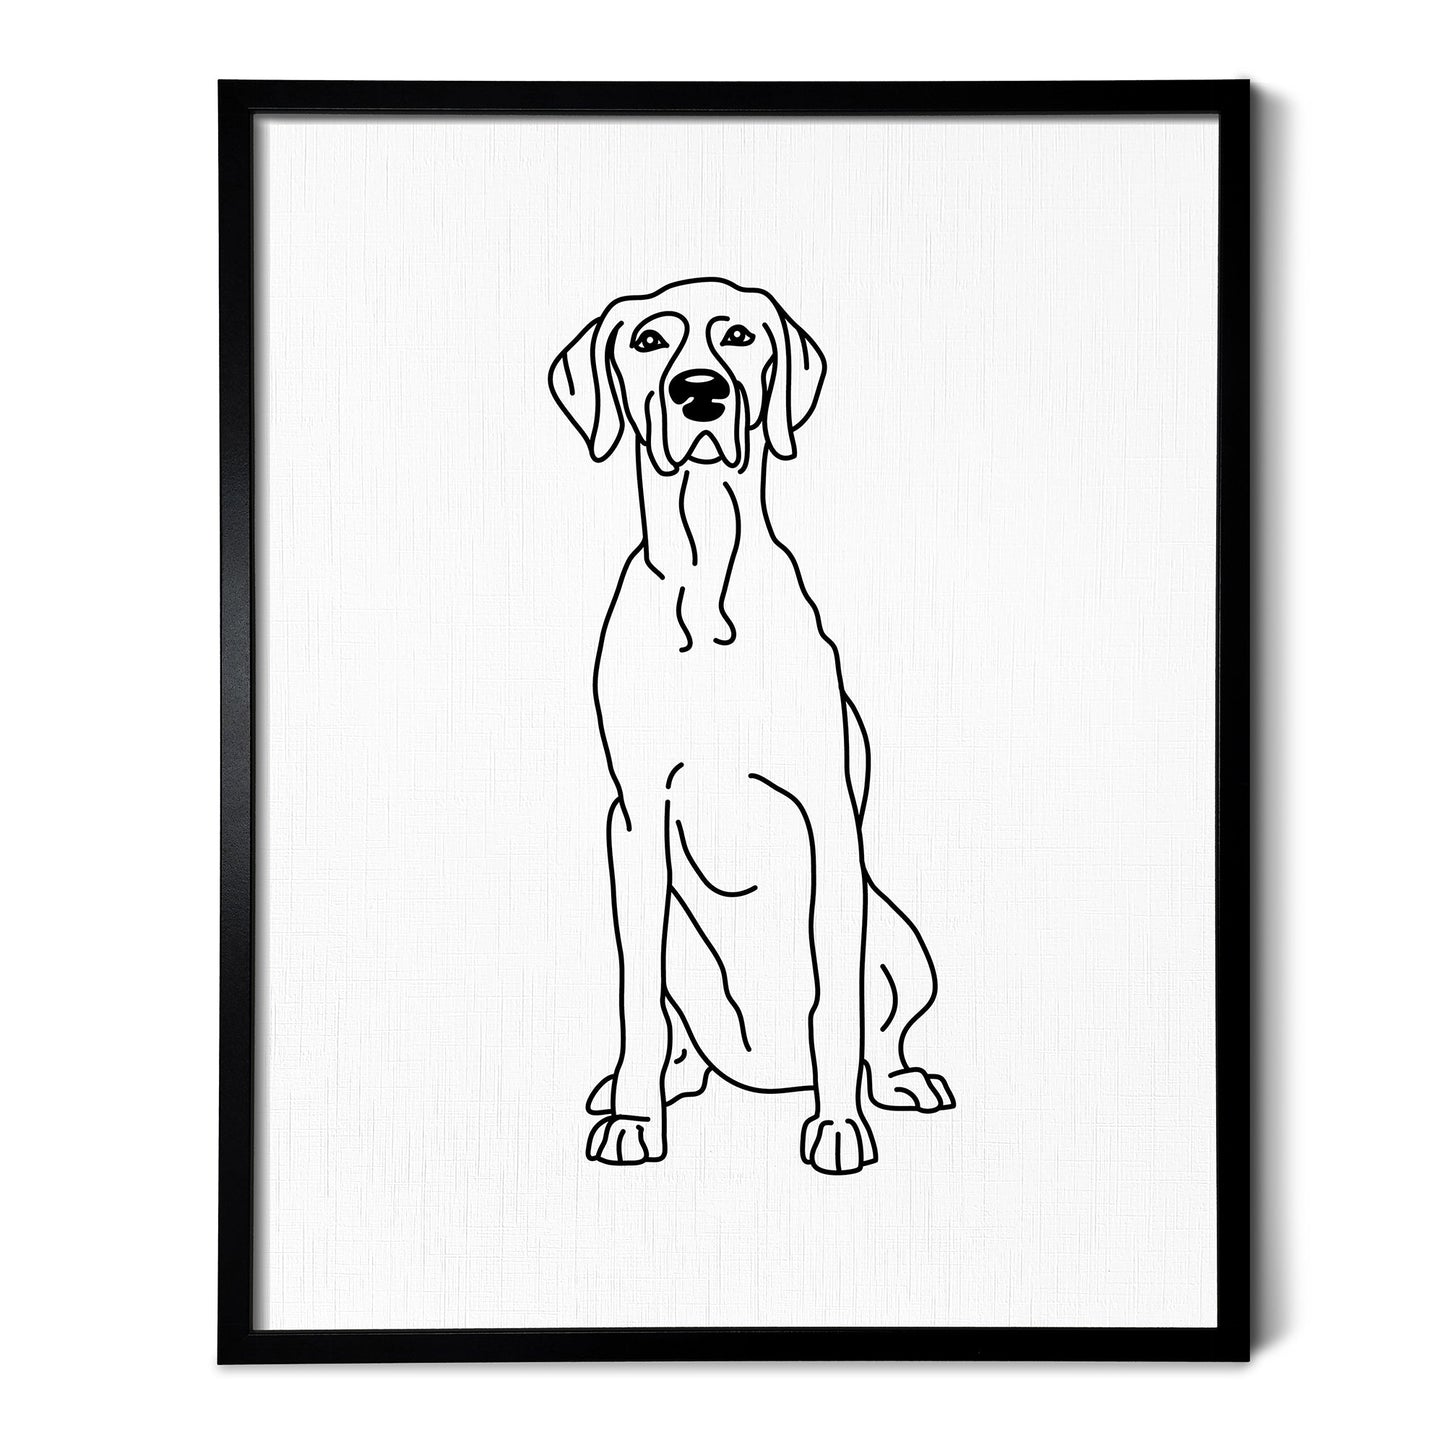 A line art drawing of a Weimaraner dog on white linen paper in a thin black picture frame